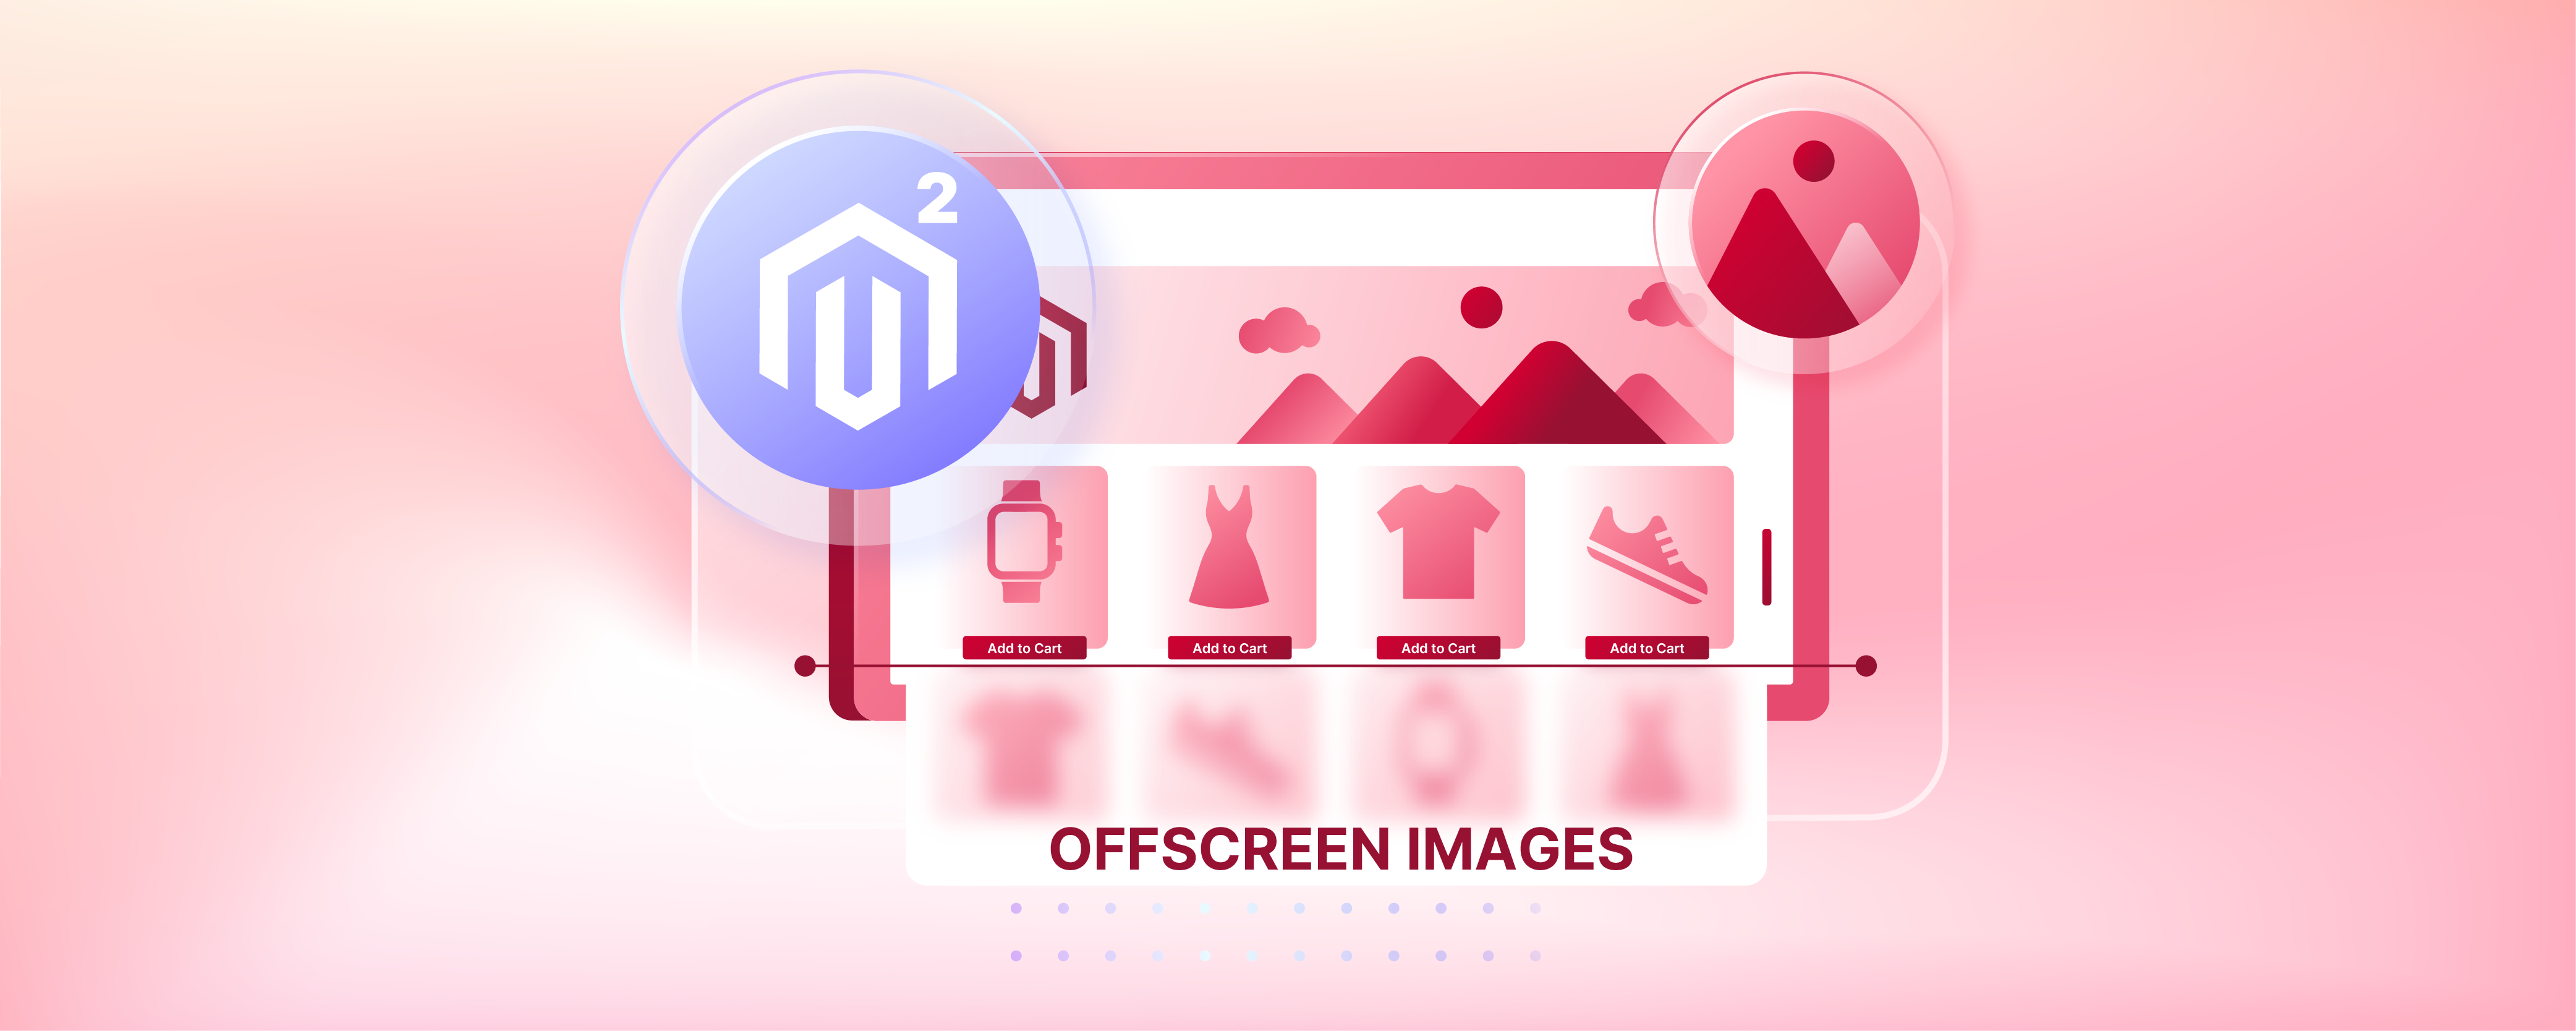 Defer Offscreen Images in Magento 2 with Lazy Loading